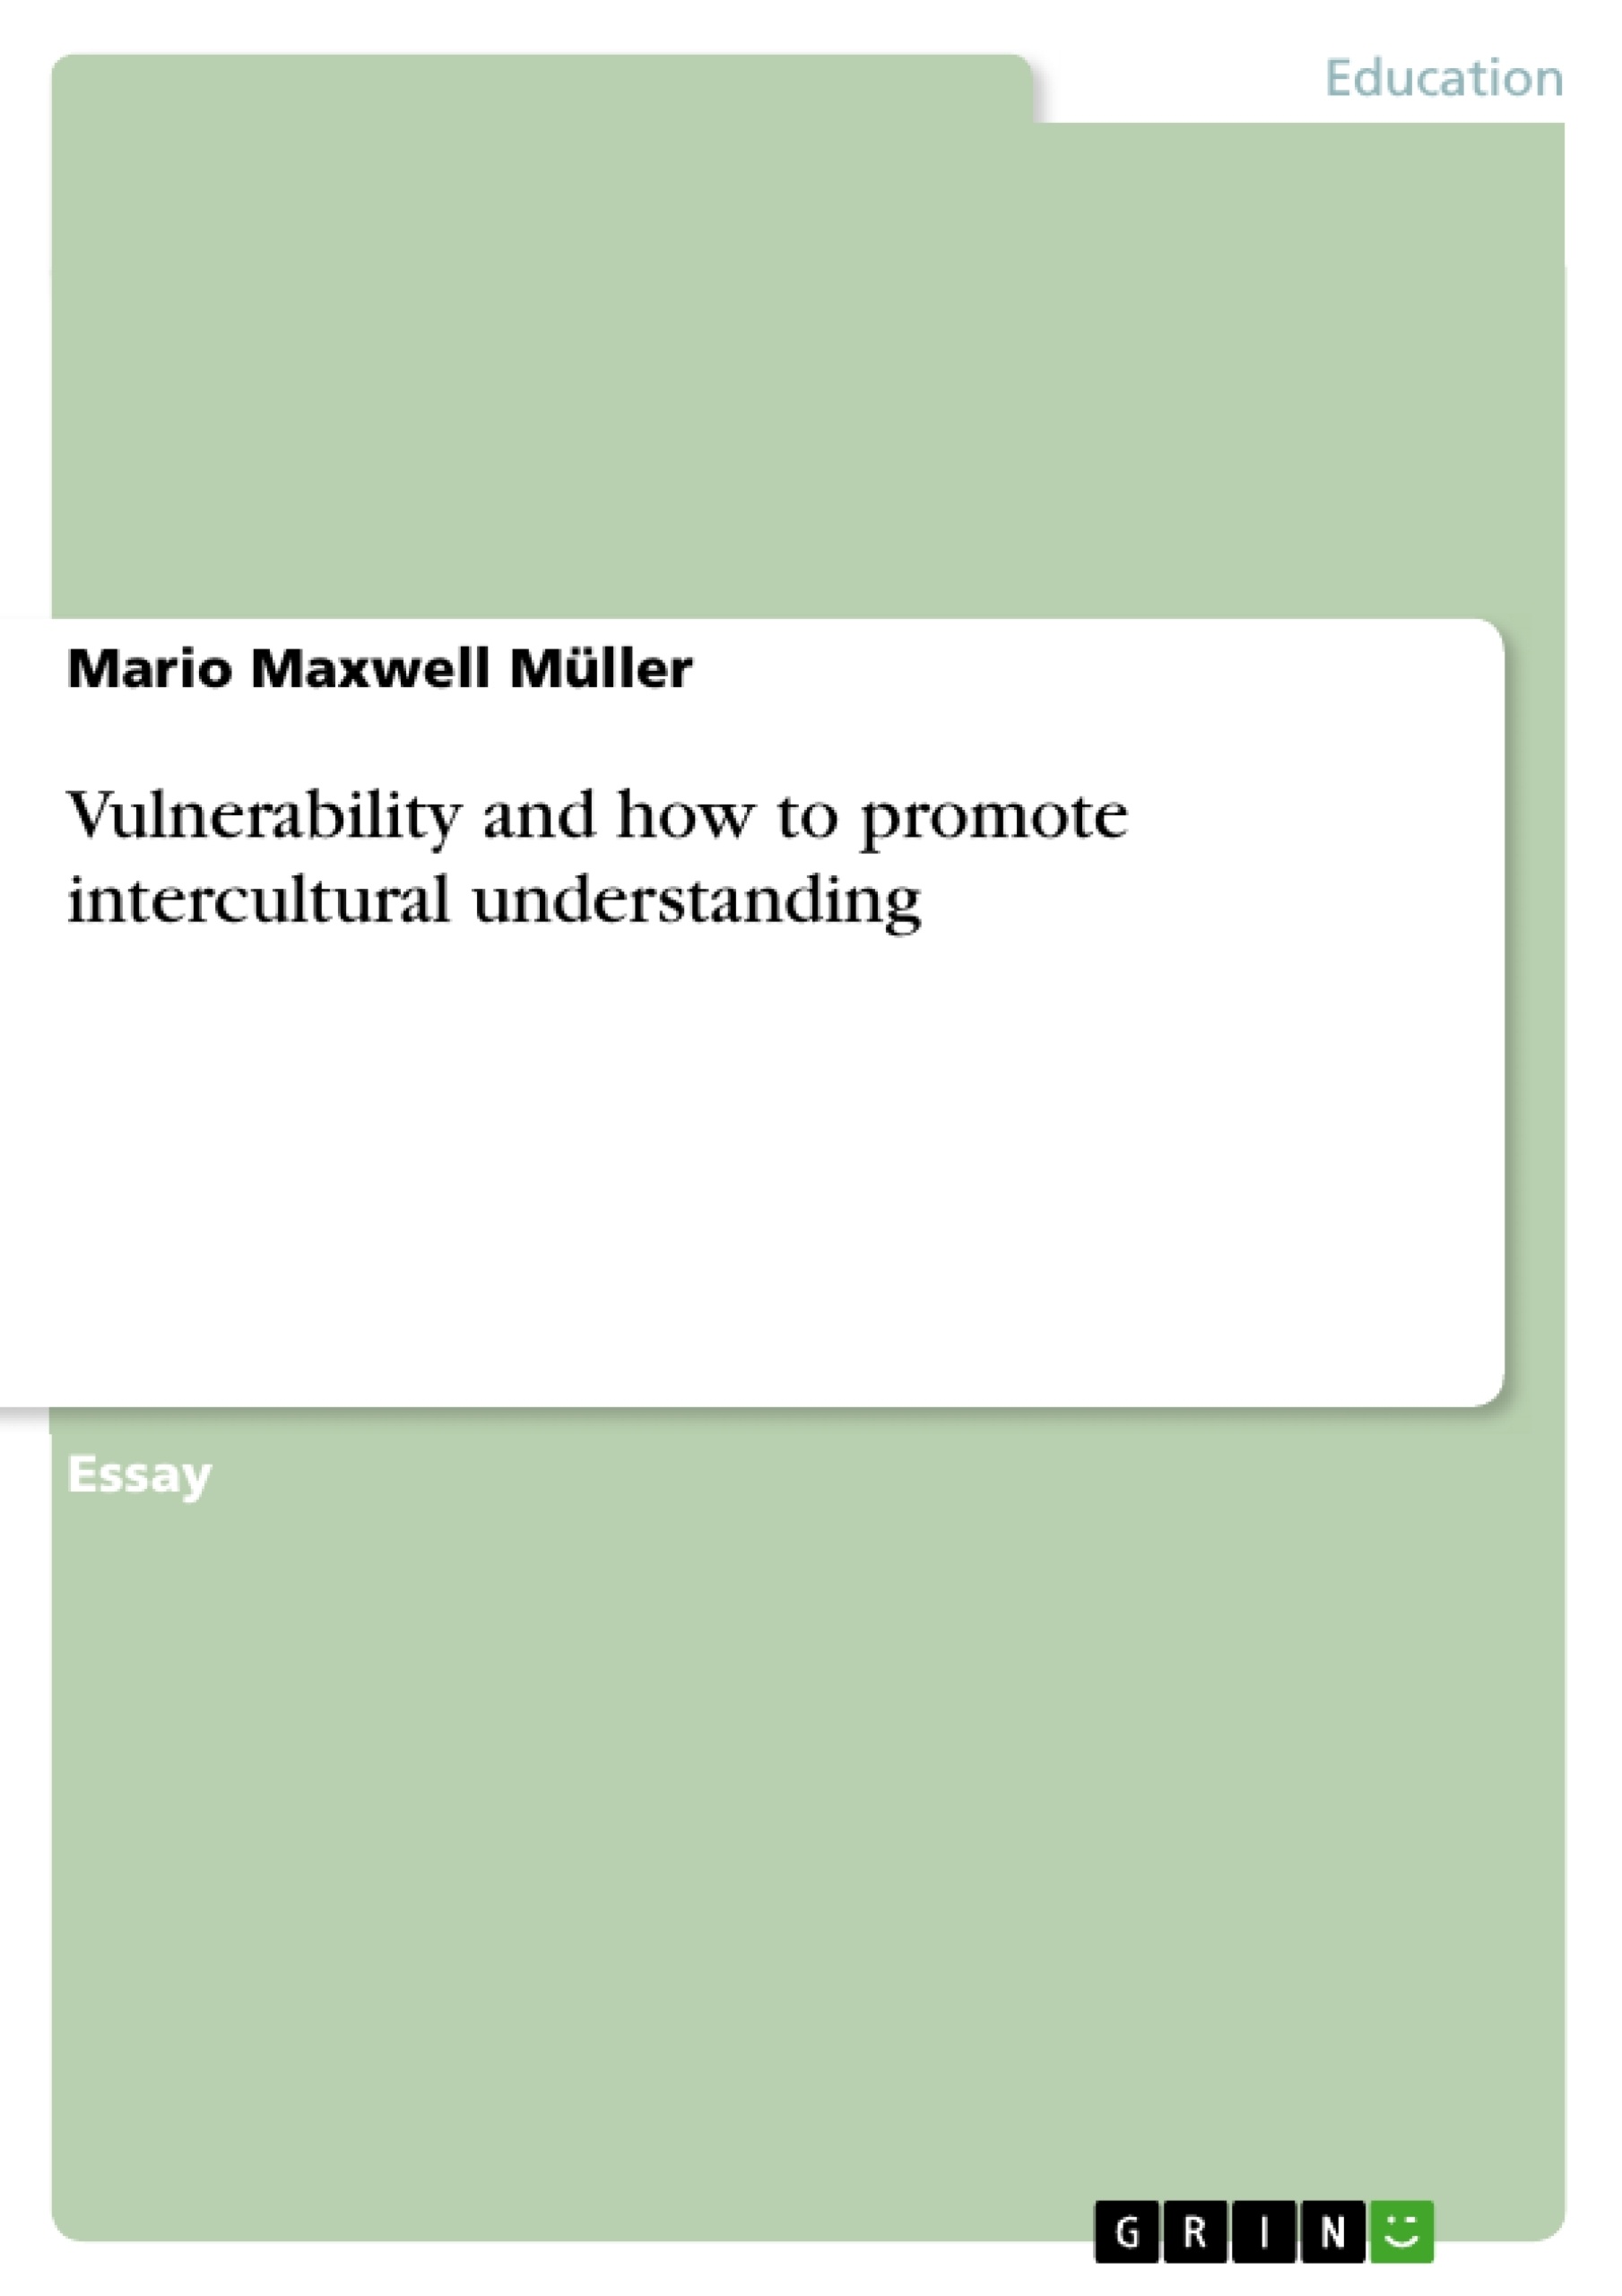 Title: Vulnerability and how to promote intercultural understanding